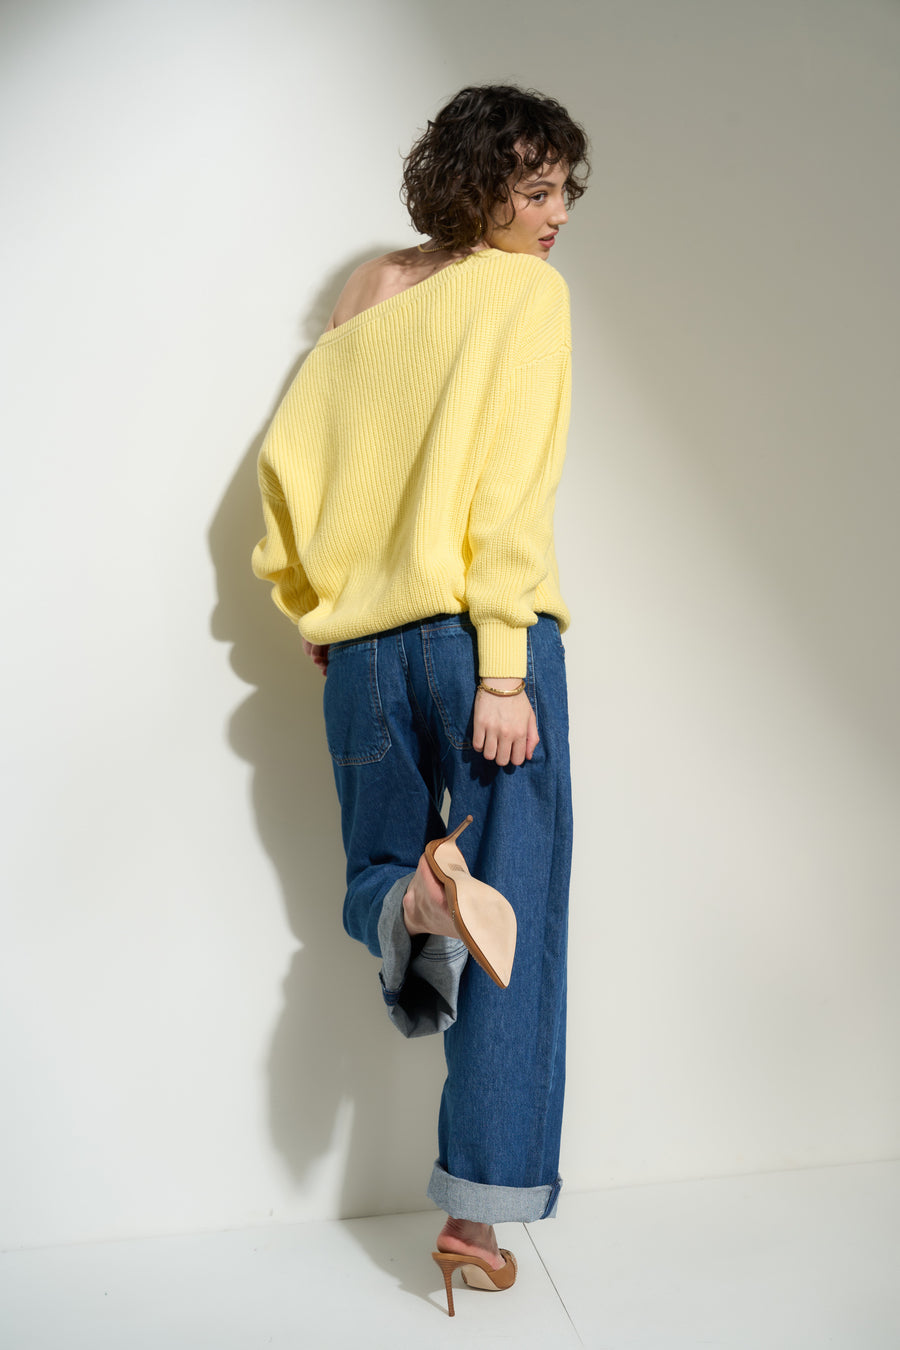 Off The Shoulder Top - Yellow